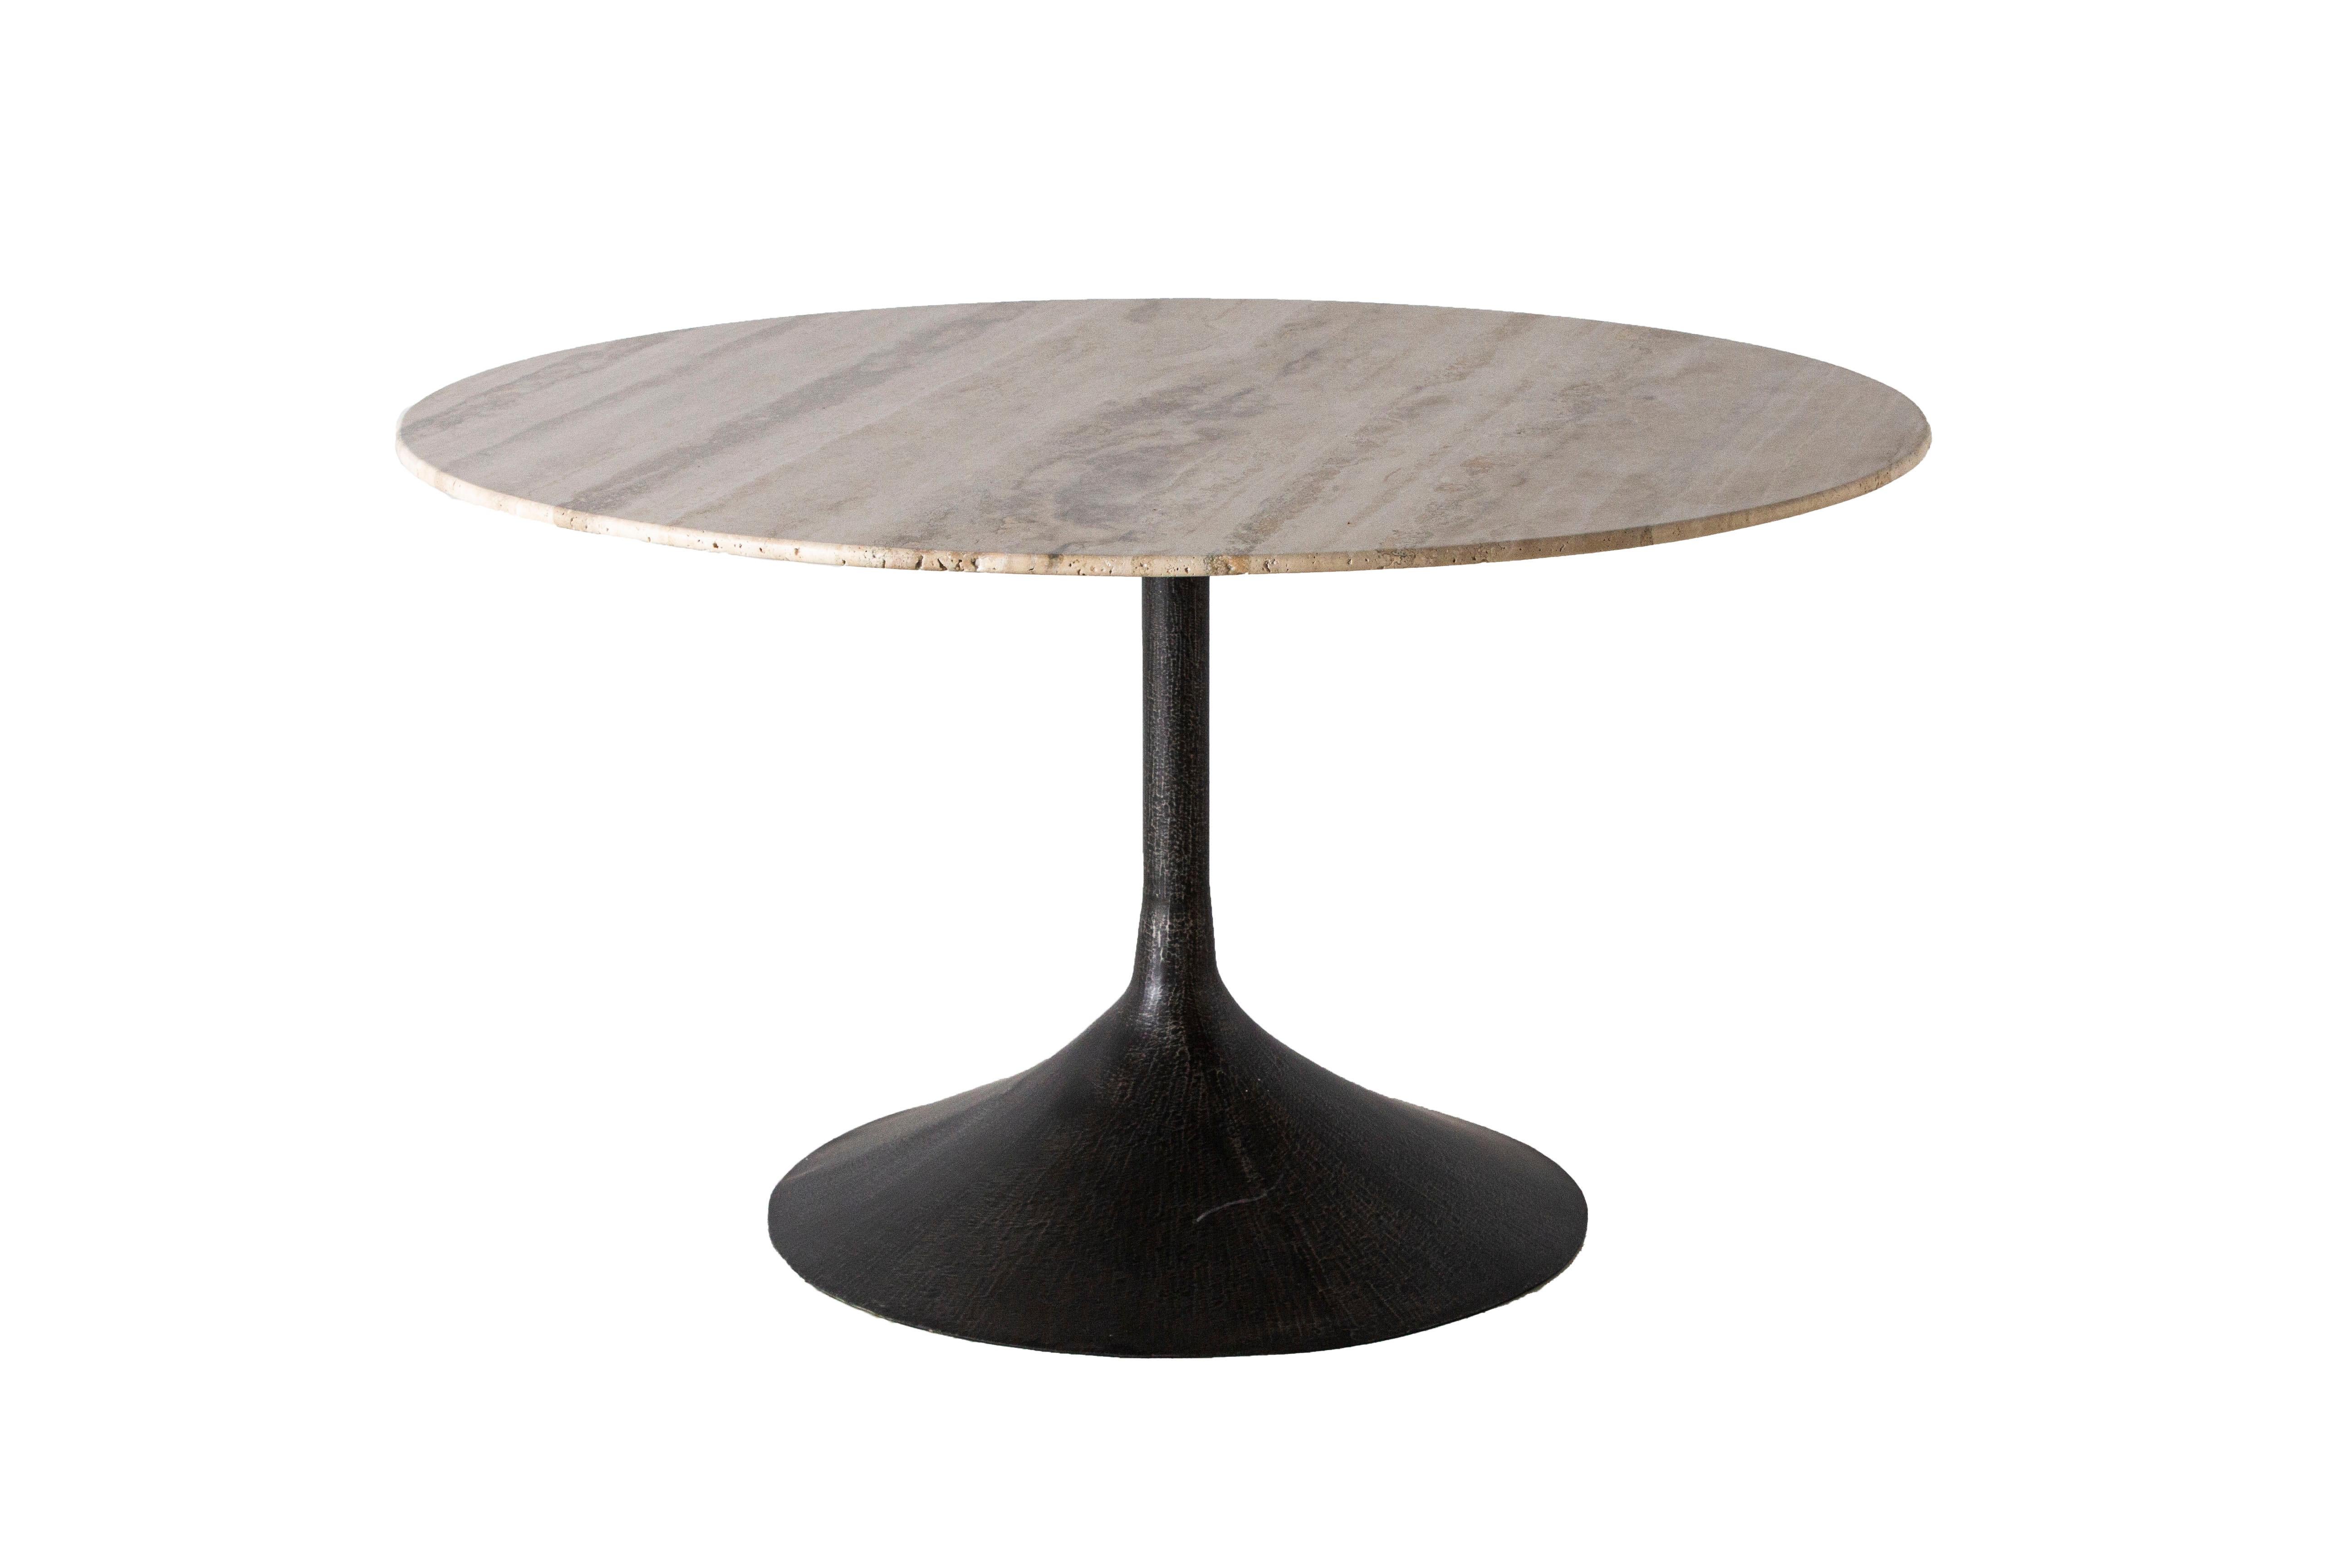 Top: Silver travertine honed with knoll edge
Base: Tulip base in Patina steel

Top and base can be sold separately. 

The top is part of our custom line, Vision and Design, and the base is part of our one of a kind line, Le Monde. Exclusive to